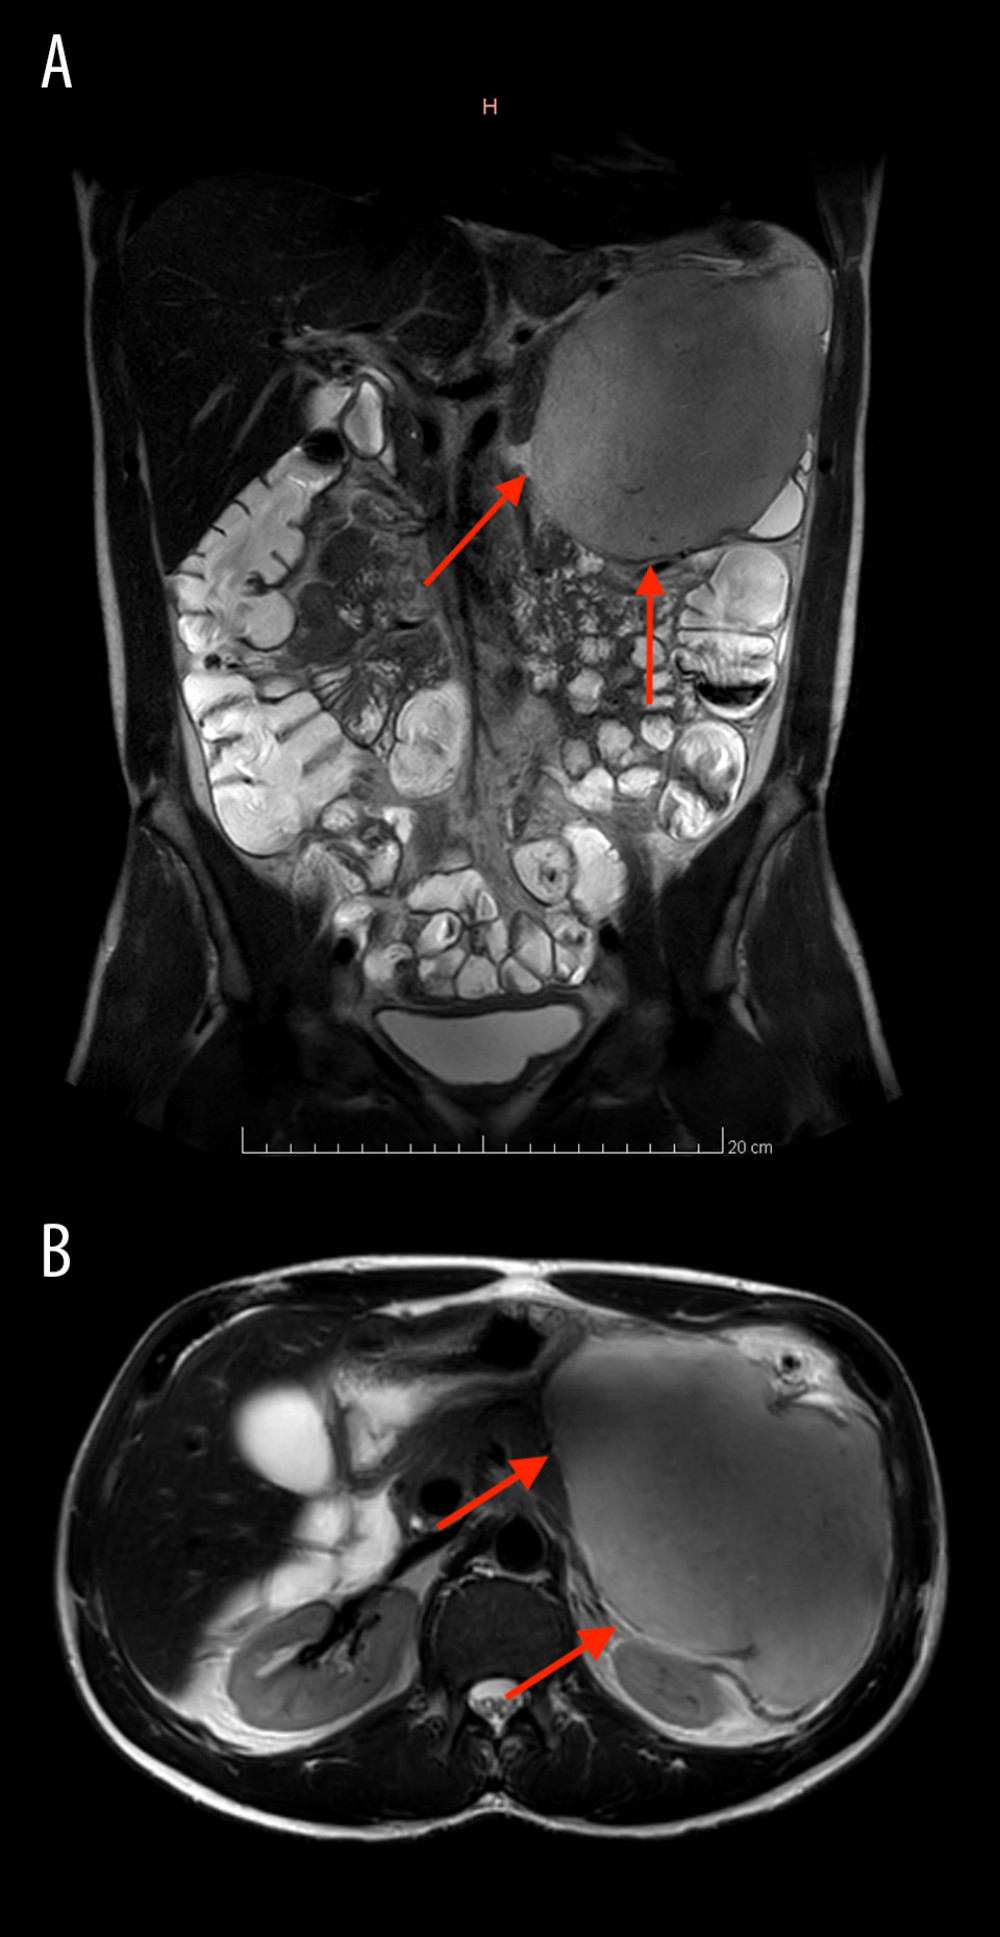 First MRI images in T2 sequence showing the pancreatic mass compressing the left colic flexure. Red arrows indicates the tumor. (A) Frontal view. (B) Axial view.